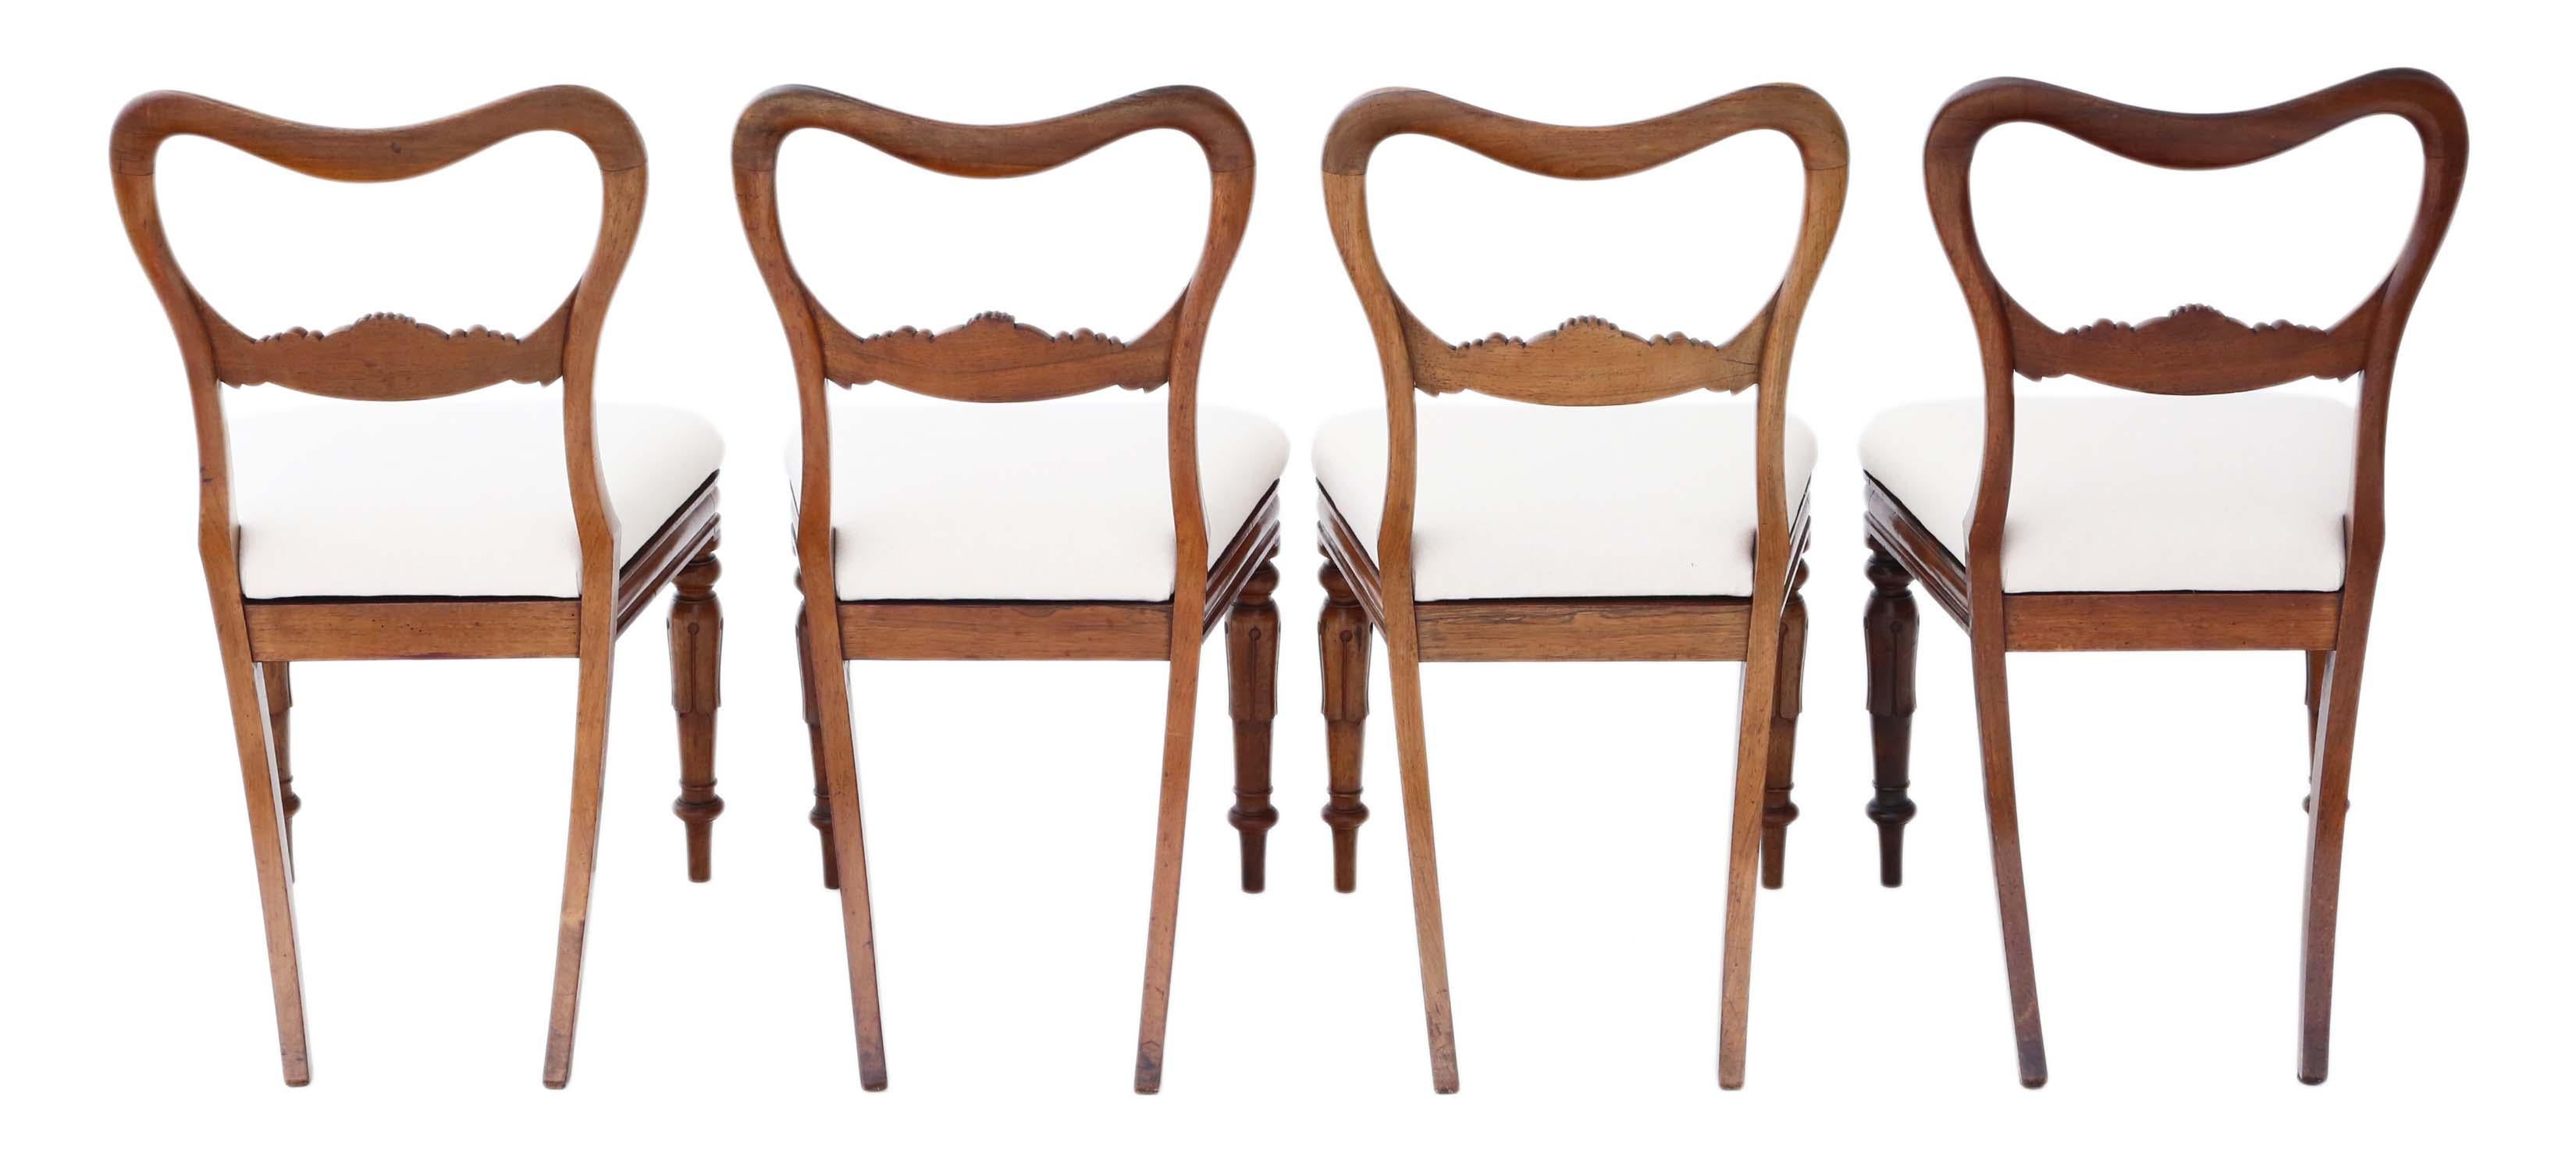 Antique quality set of 4 William IV rosewood balloon back dining chairs, circa 1835.
Solid, with no loose joints. Lovely simple elegant design.
Recent upholstery in a heavy weight upholstery fabric, with an off white color.
Overall maximum